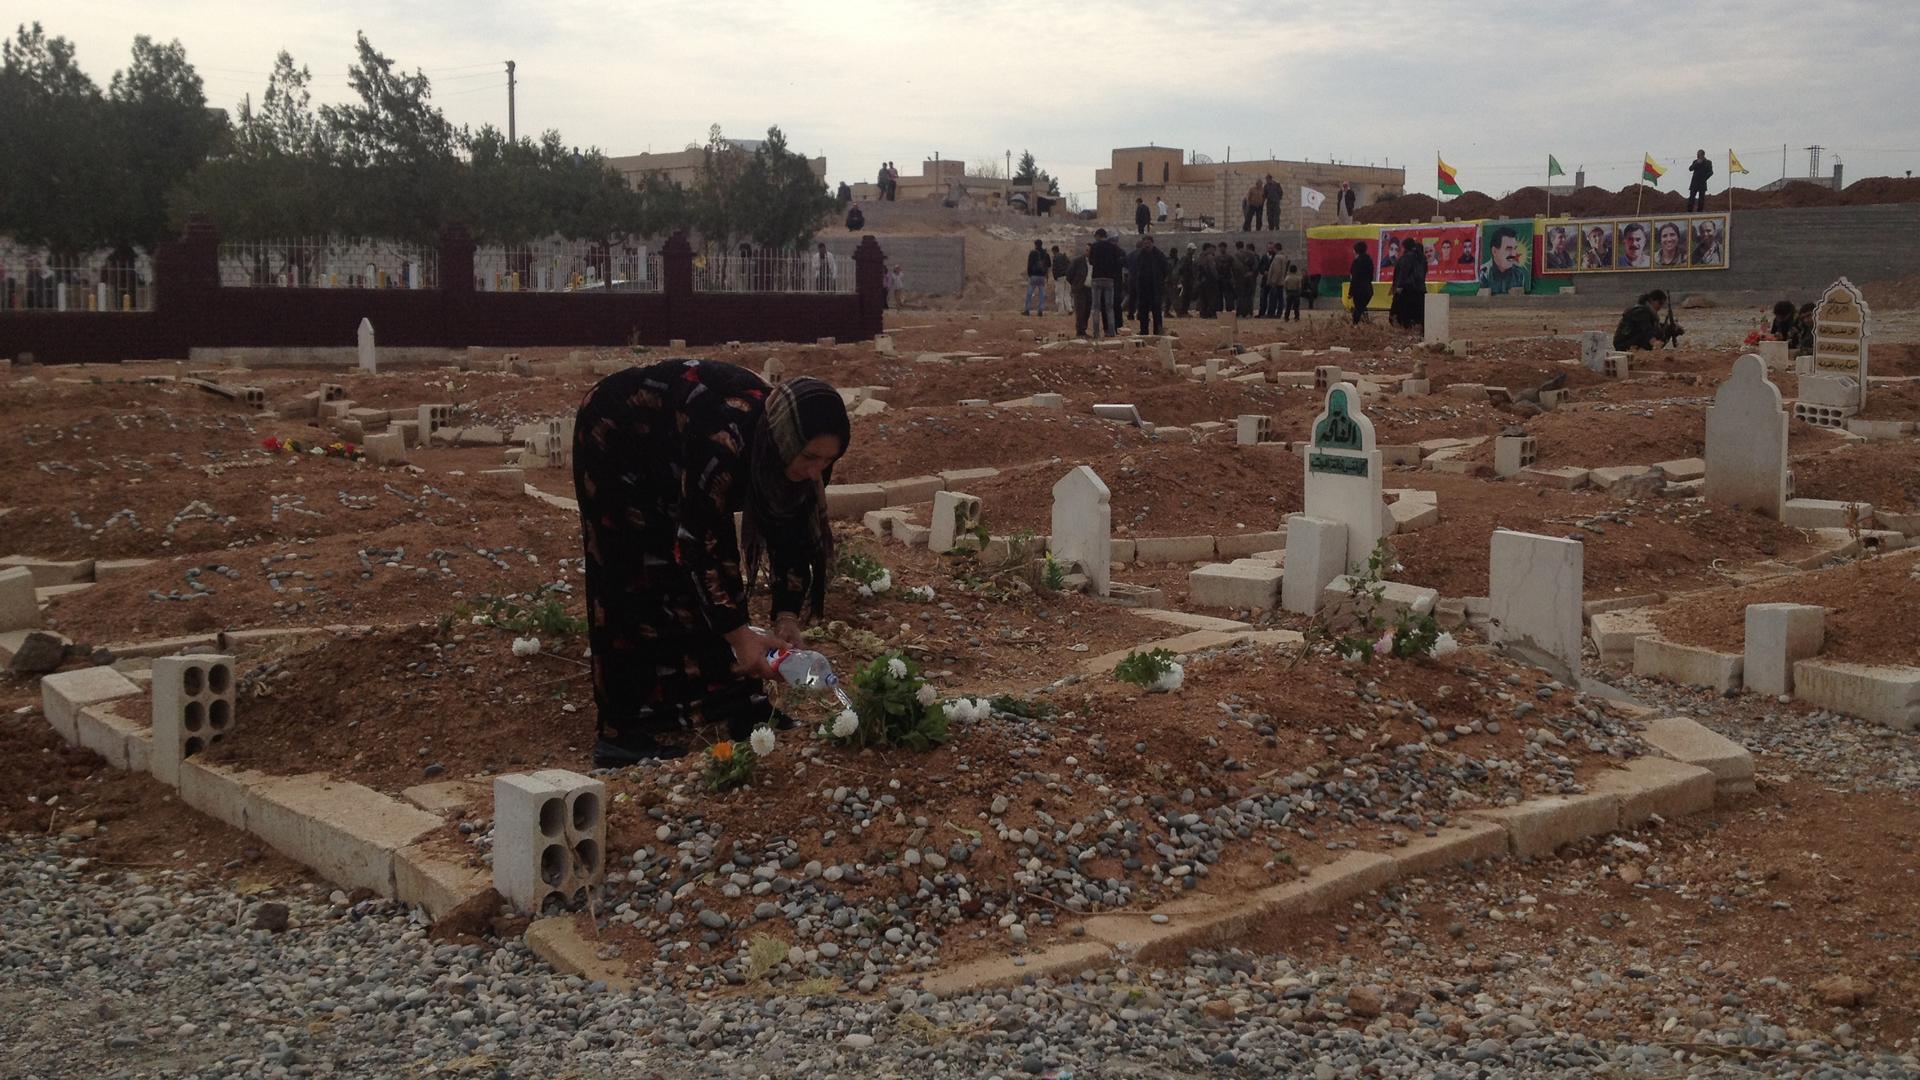 Kurds call it the "martyr cemetery." Dozens of freshly-covered graves have stretched its boundaries.